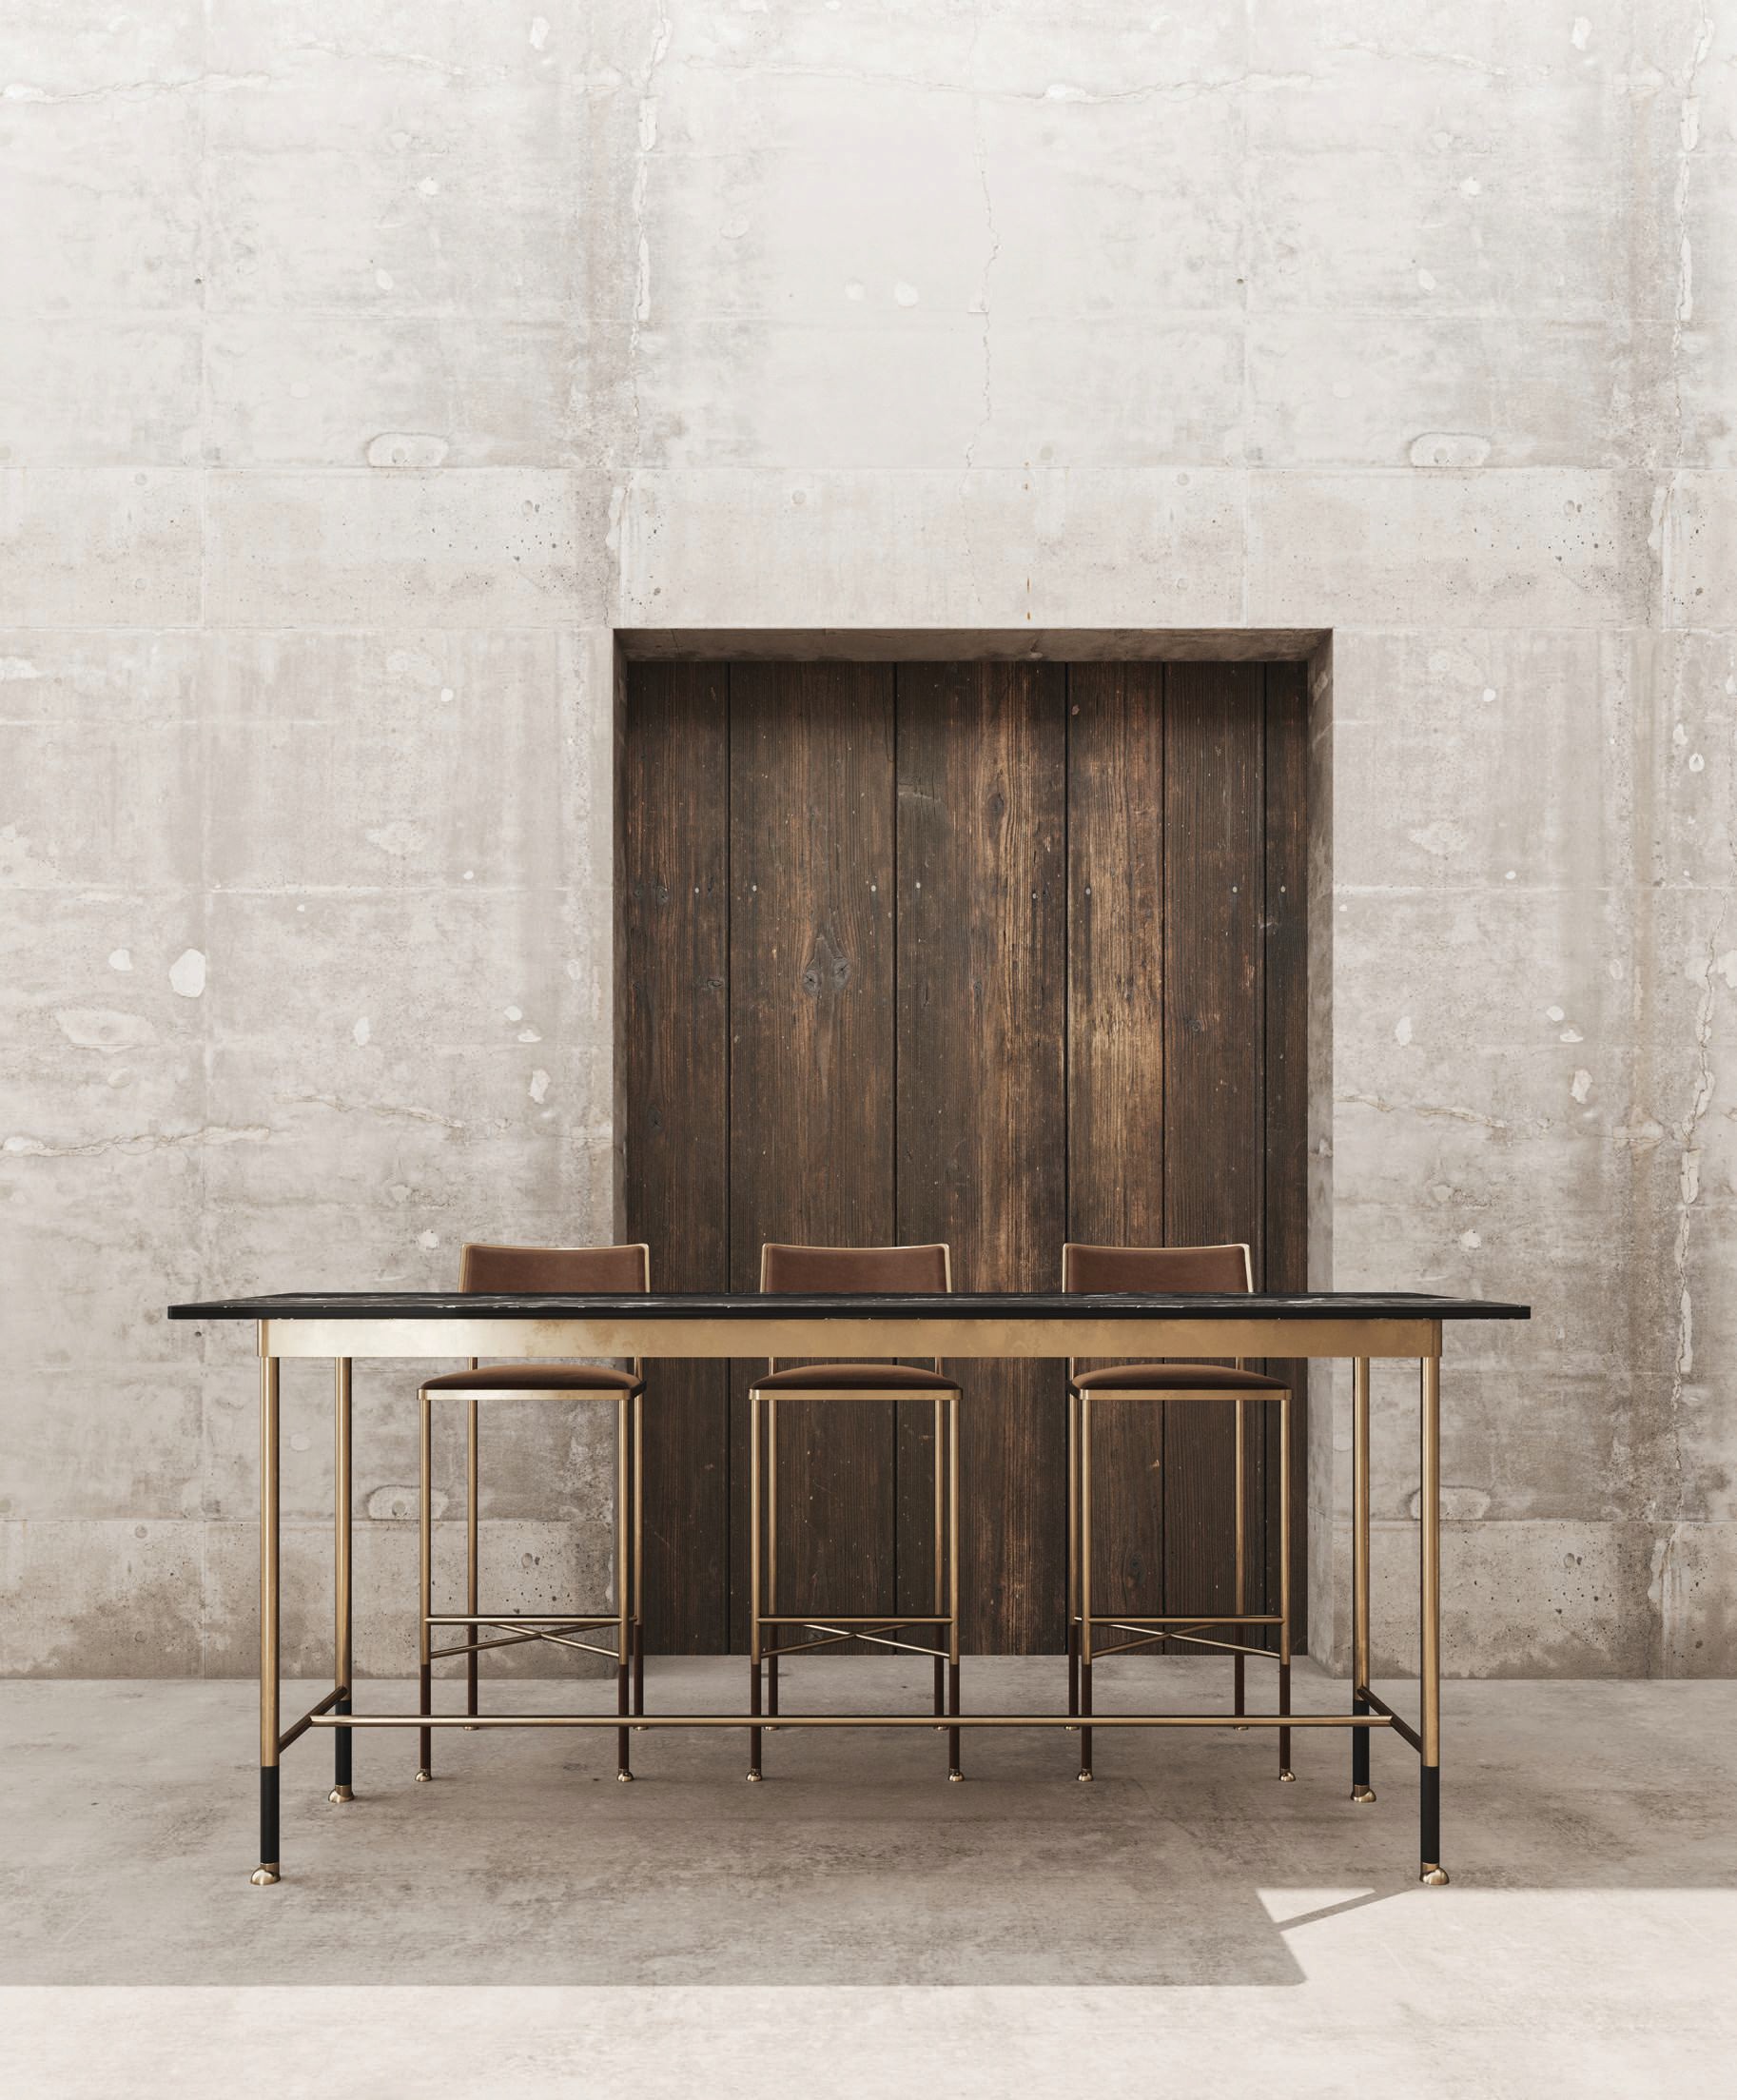 Designer Cooper Reynolds Gross’ F.R.F.G. dining table from his debut CRG collection combines brass and stone. PHOTO COURTESY OF CRG